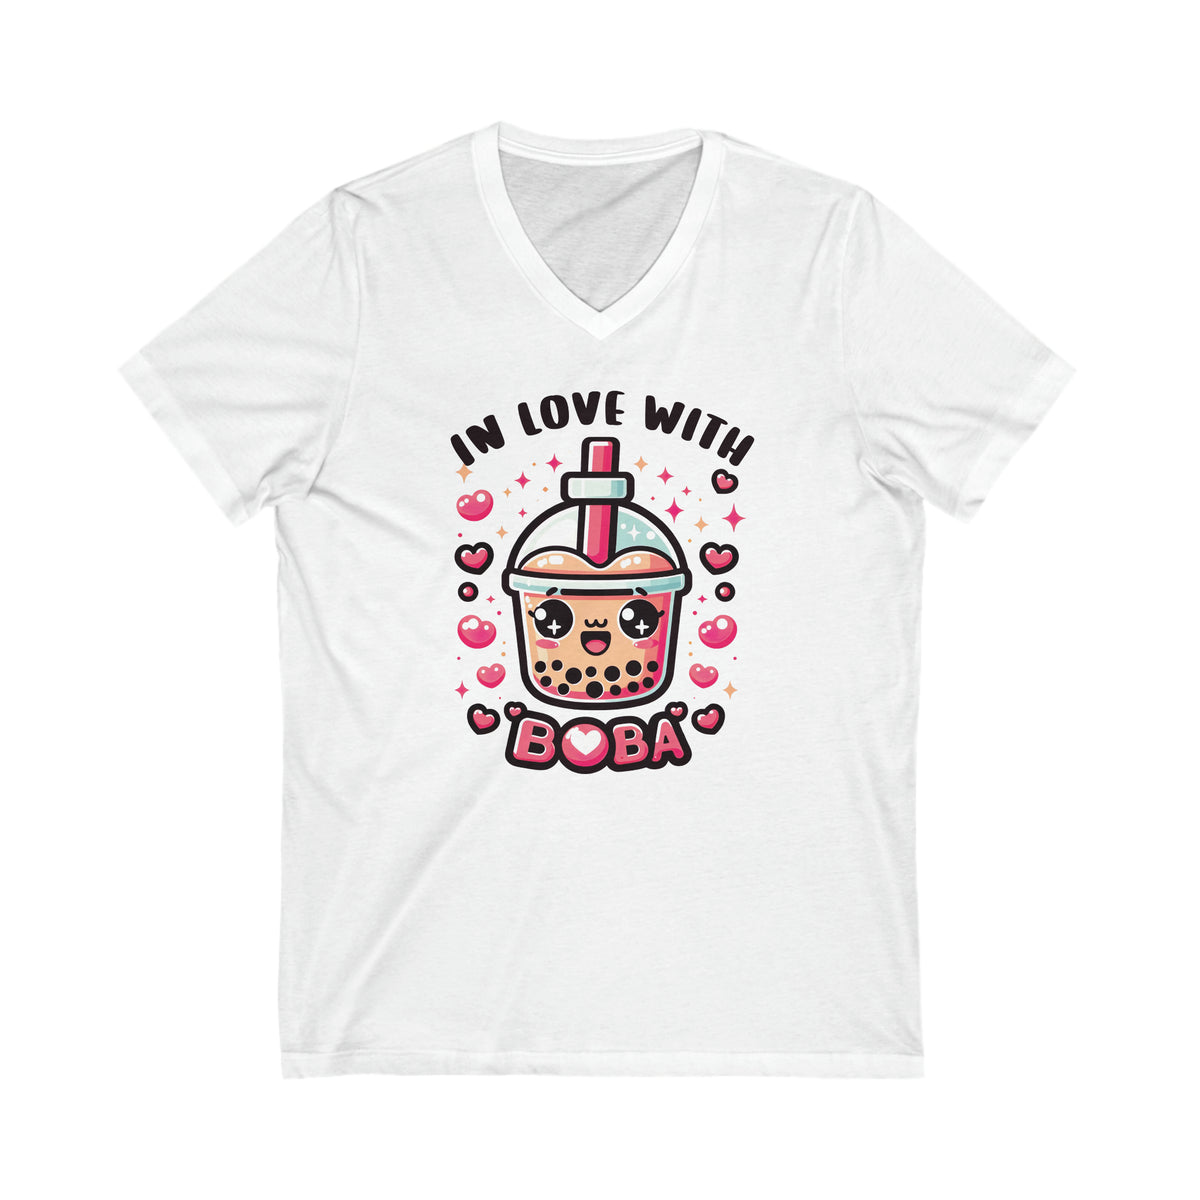 In Love With Boba Tea Lover Kawaii Shirt |  Cute Kawaii Valentine's Day Gift for Her | Unisex Jersey V-Neck T-shirt